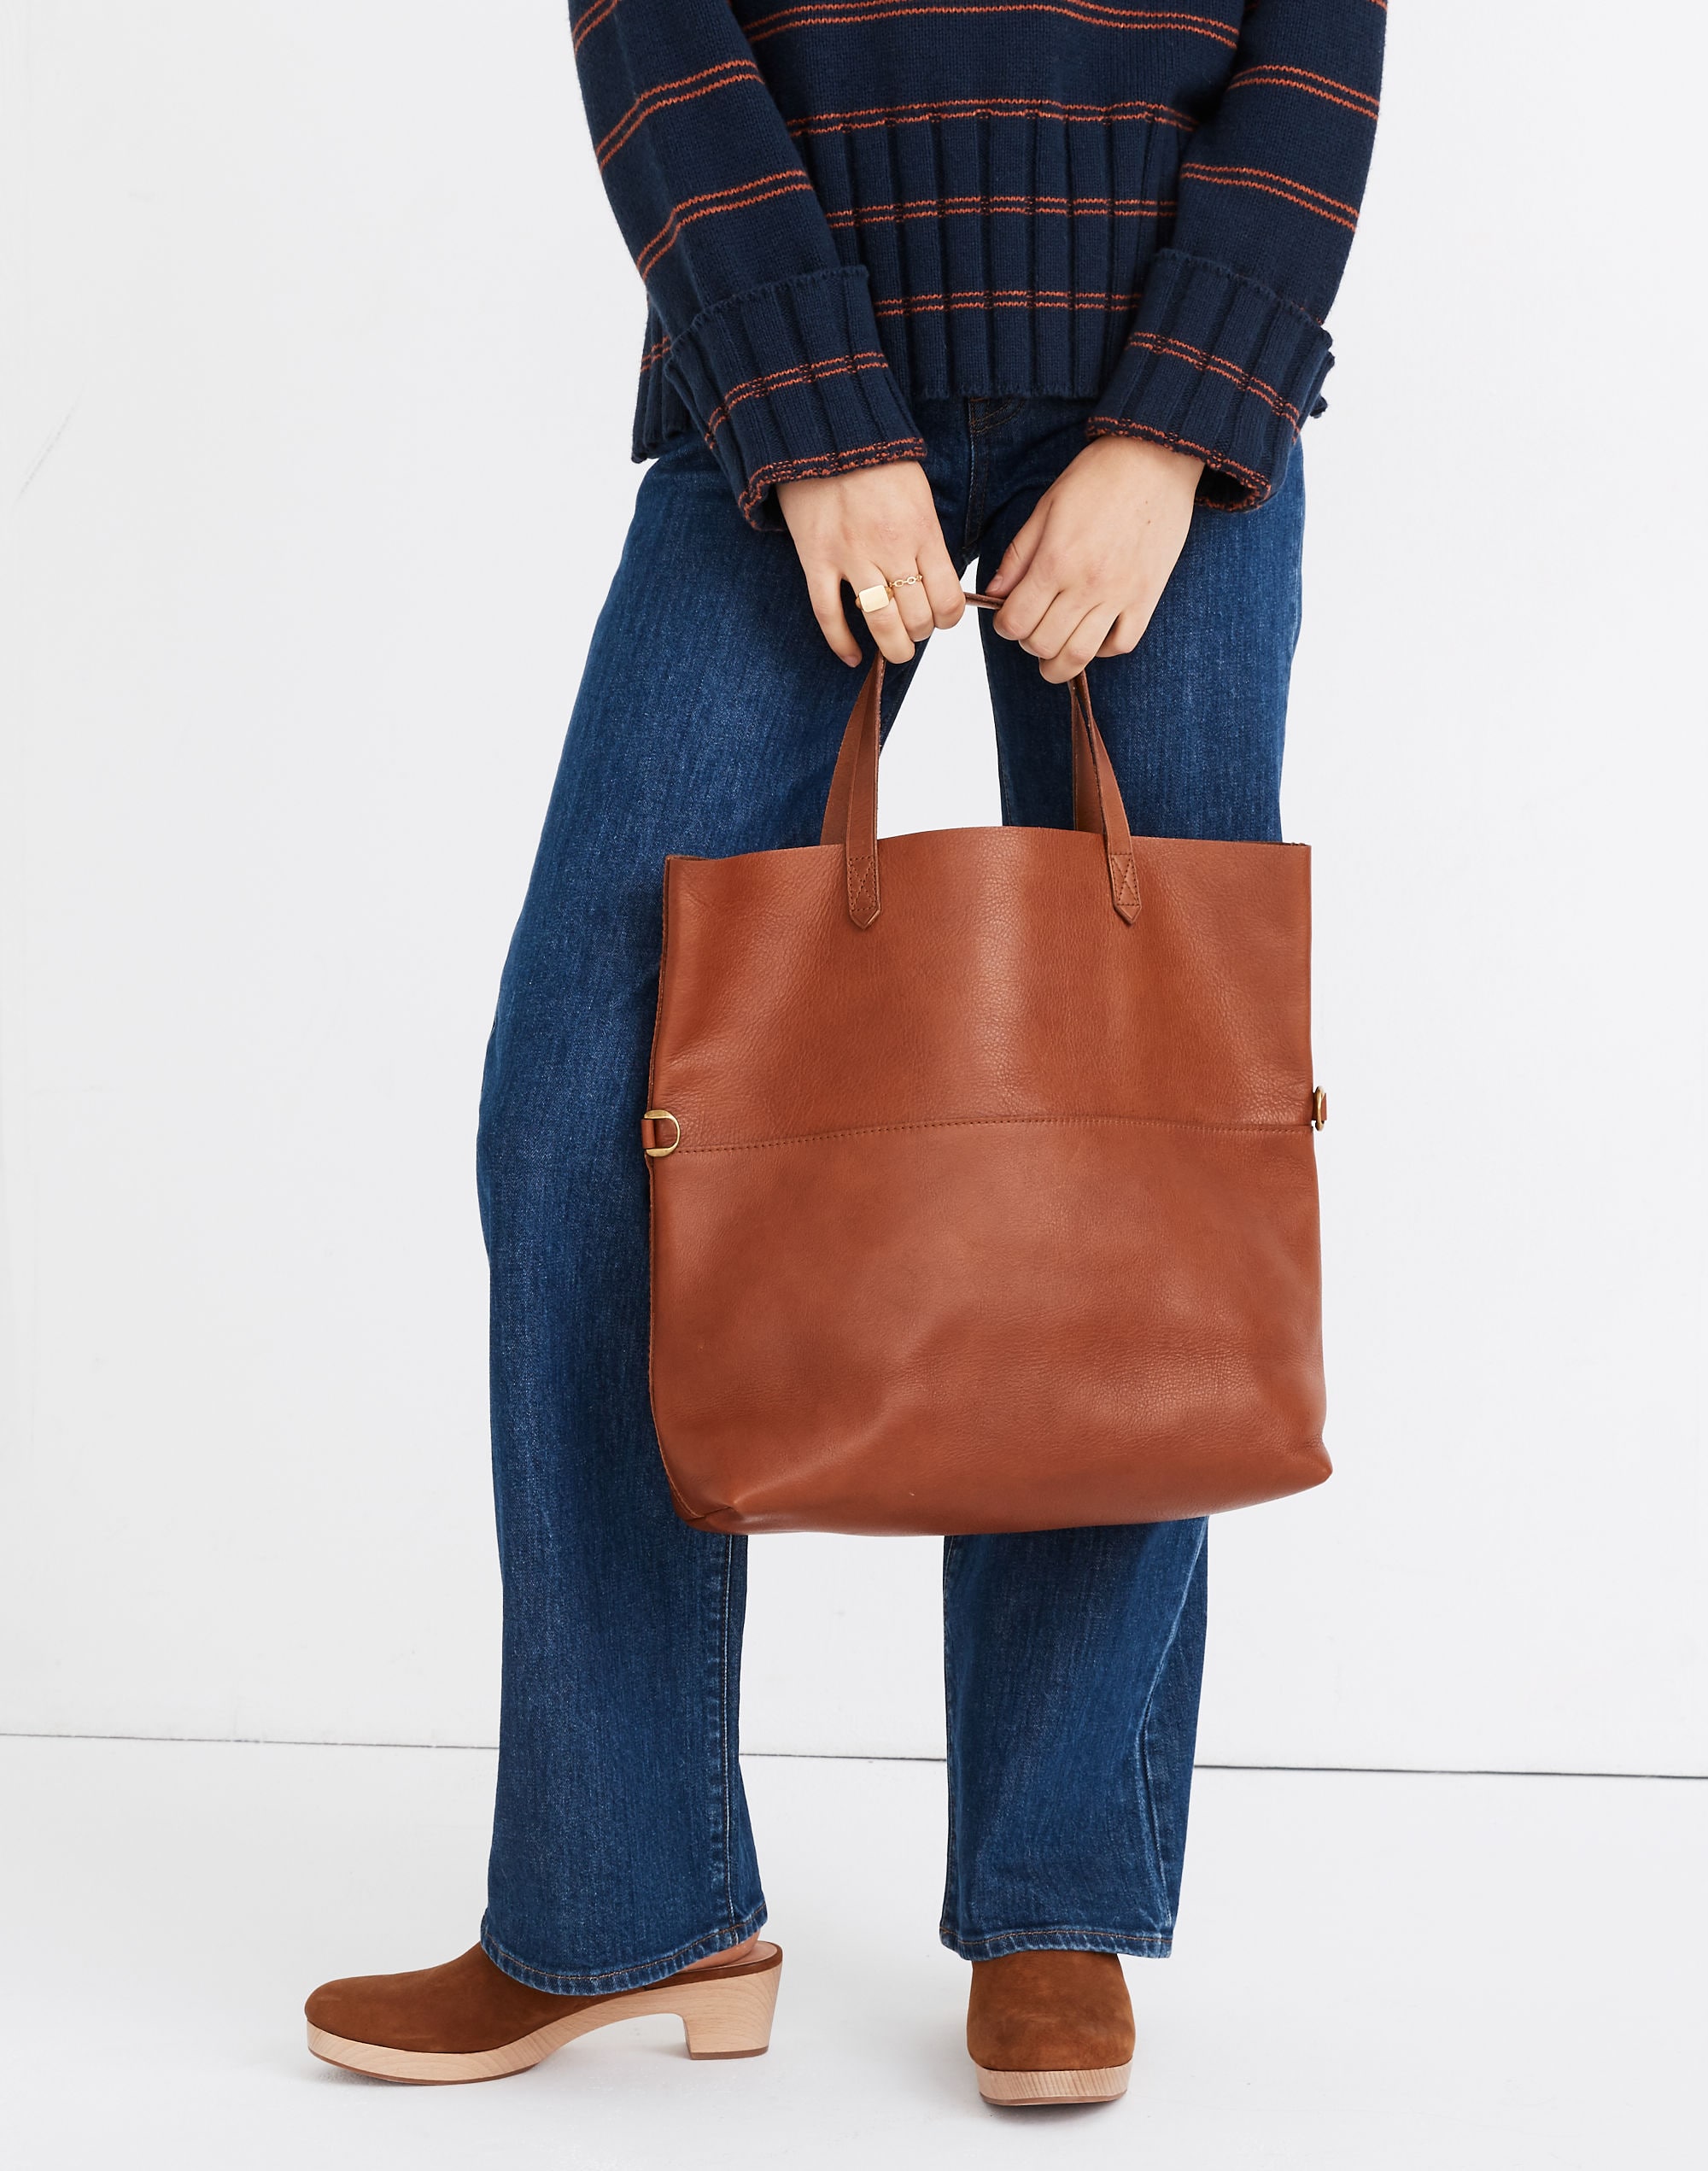 Madewell The Foldover Transport Tote